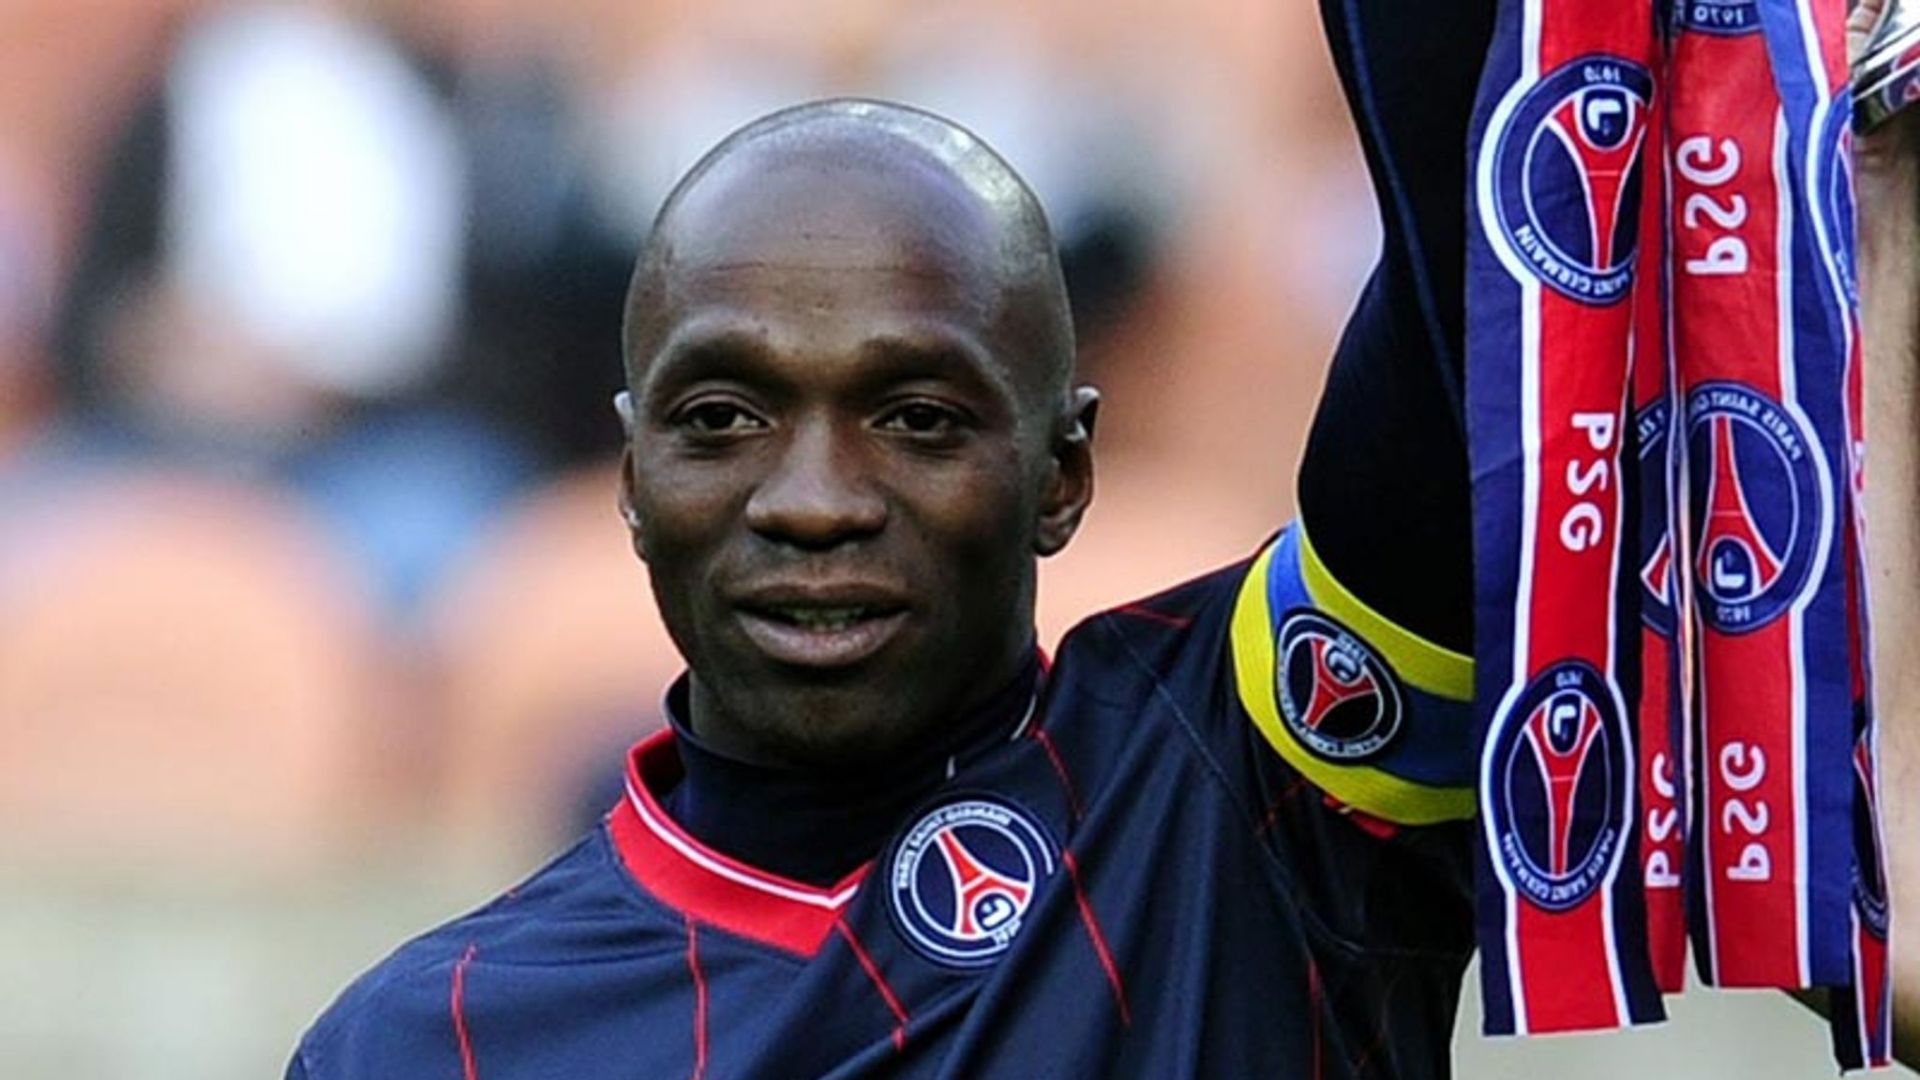 Makelele showed his class with the Ligue 1 club (image via Twitter)